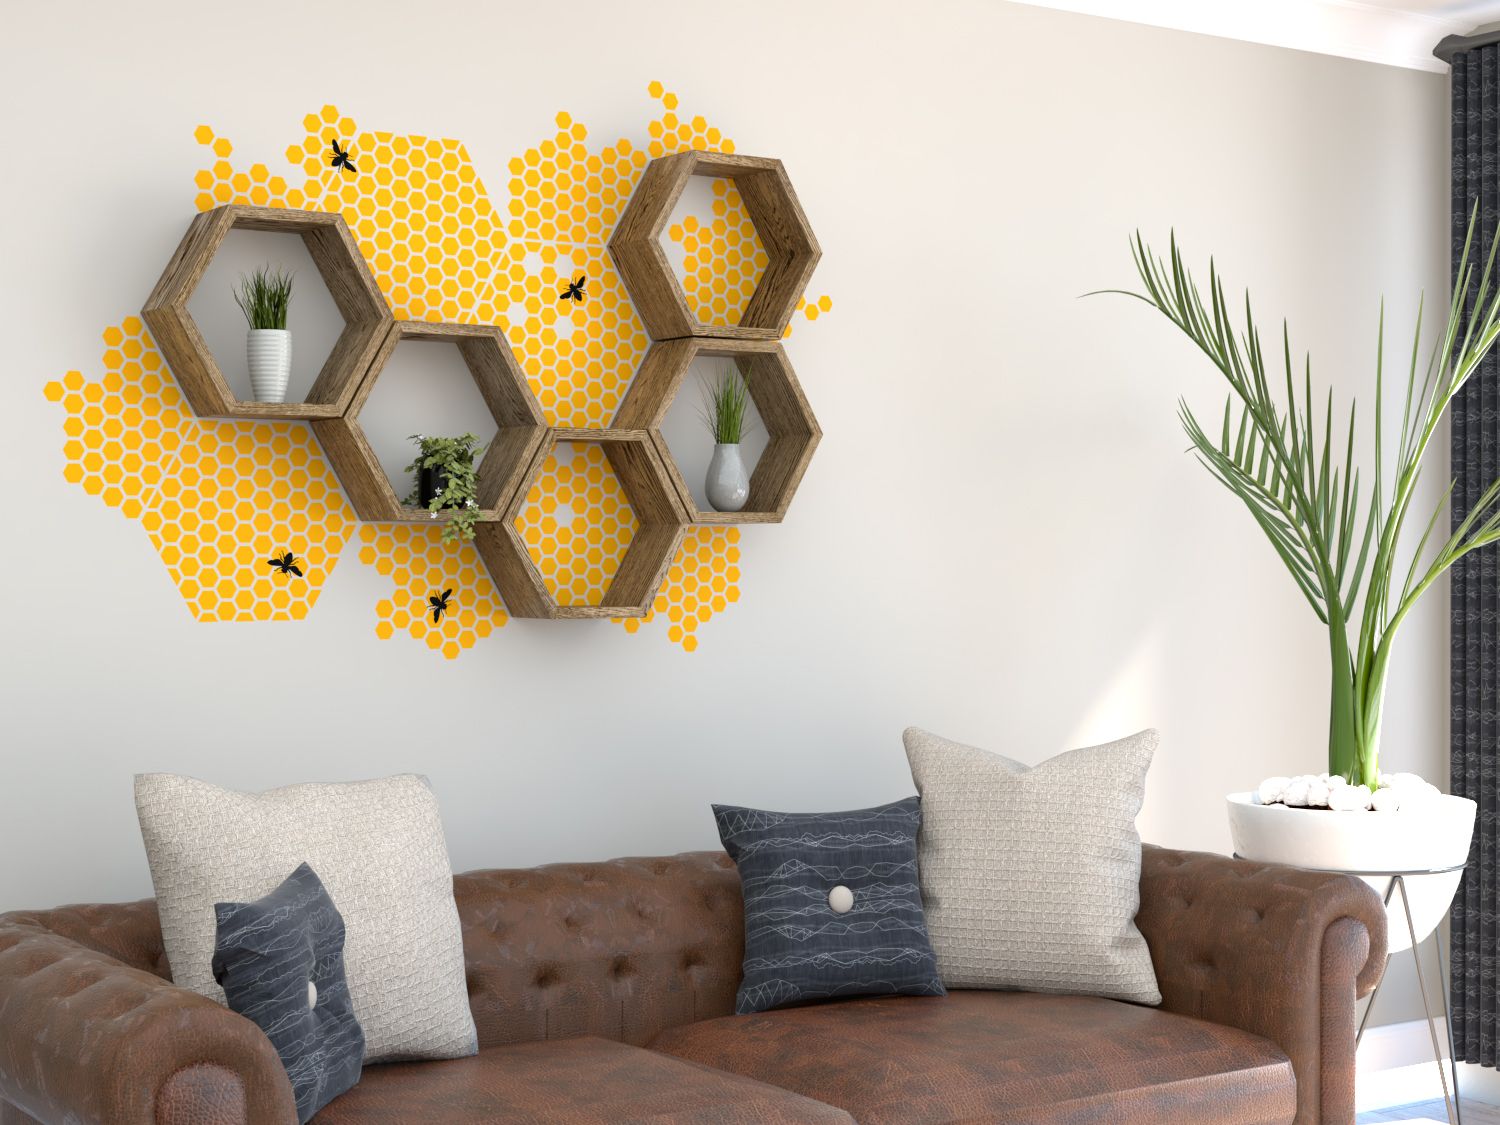 Vinyl Wall Decal | Wall Stickers | Honeycomb Decal | Wall Regarding Stripes Wall Art (View 12 of 15)